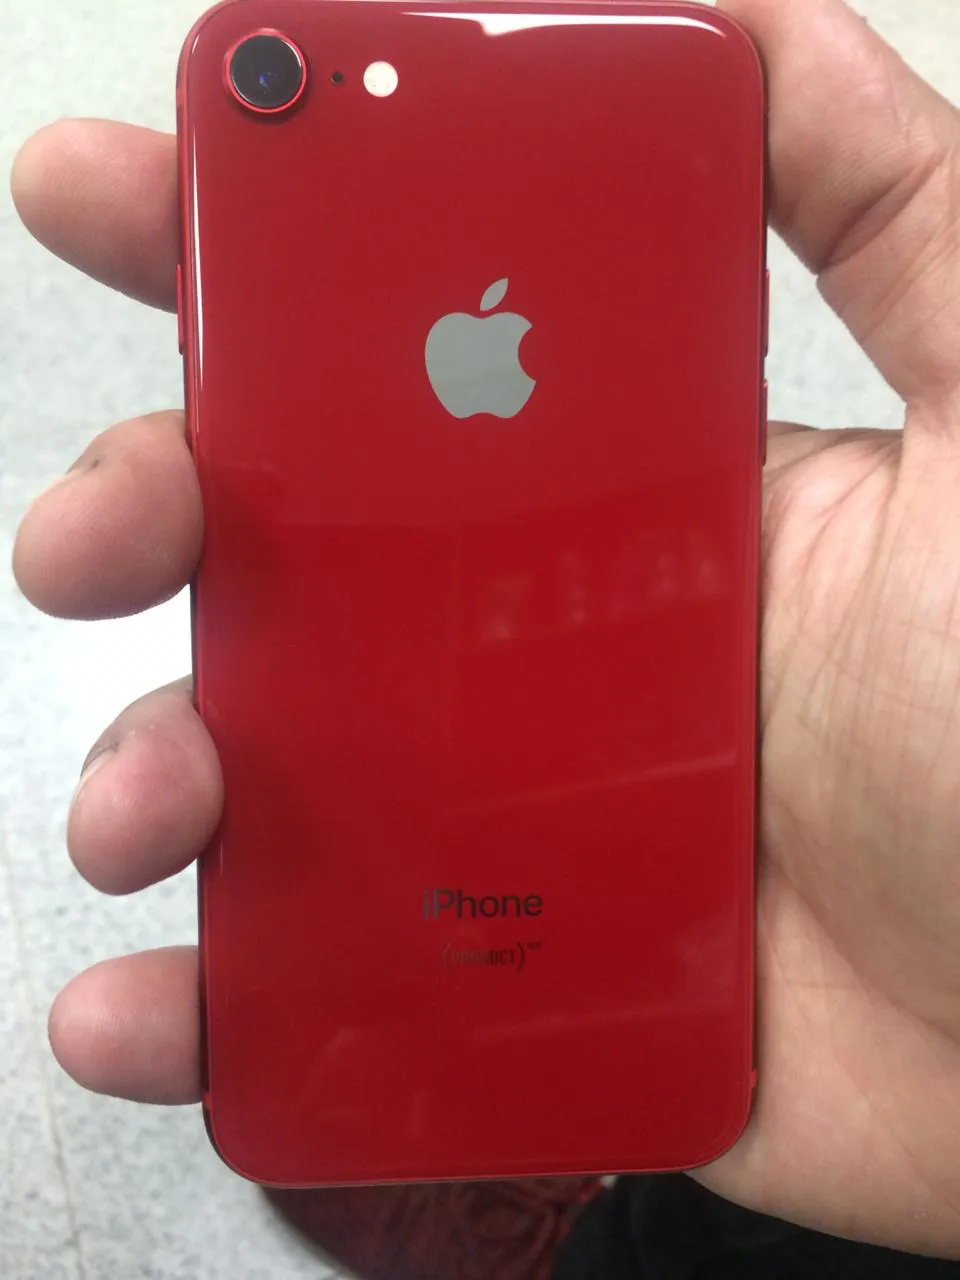 iPhone 8 red edition - photo 1